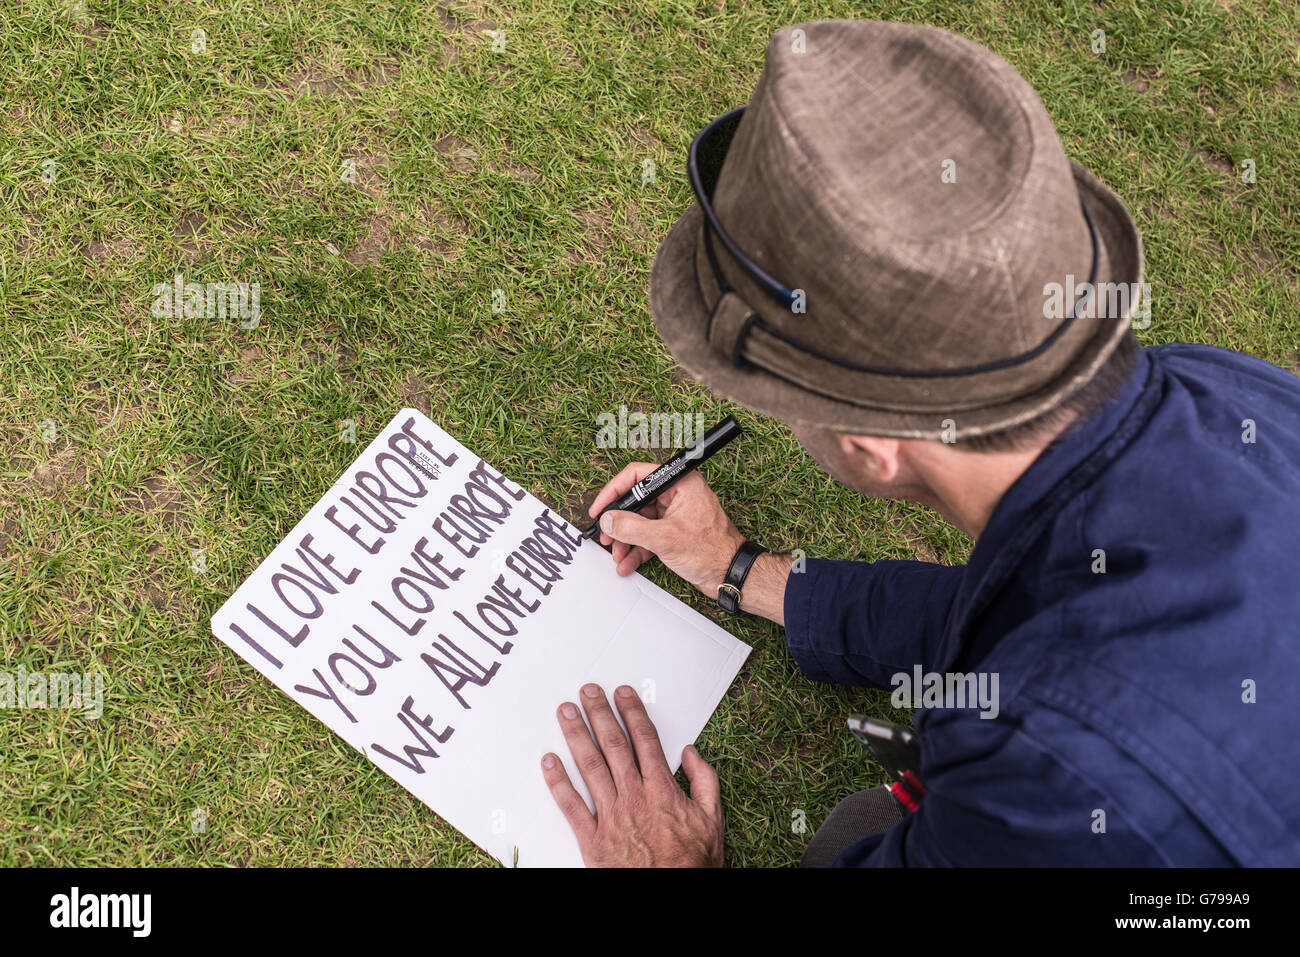 Westminster, London, UK. 25th June, 2016. Man writing 'I love Europe' on a poster as part of protests against Brexit in front of the House of Parliament in London, UK. Nicola Ferrari /Alamy Live News Stock Photo